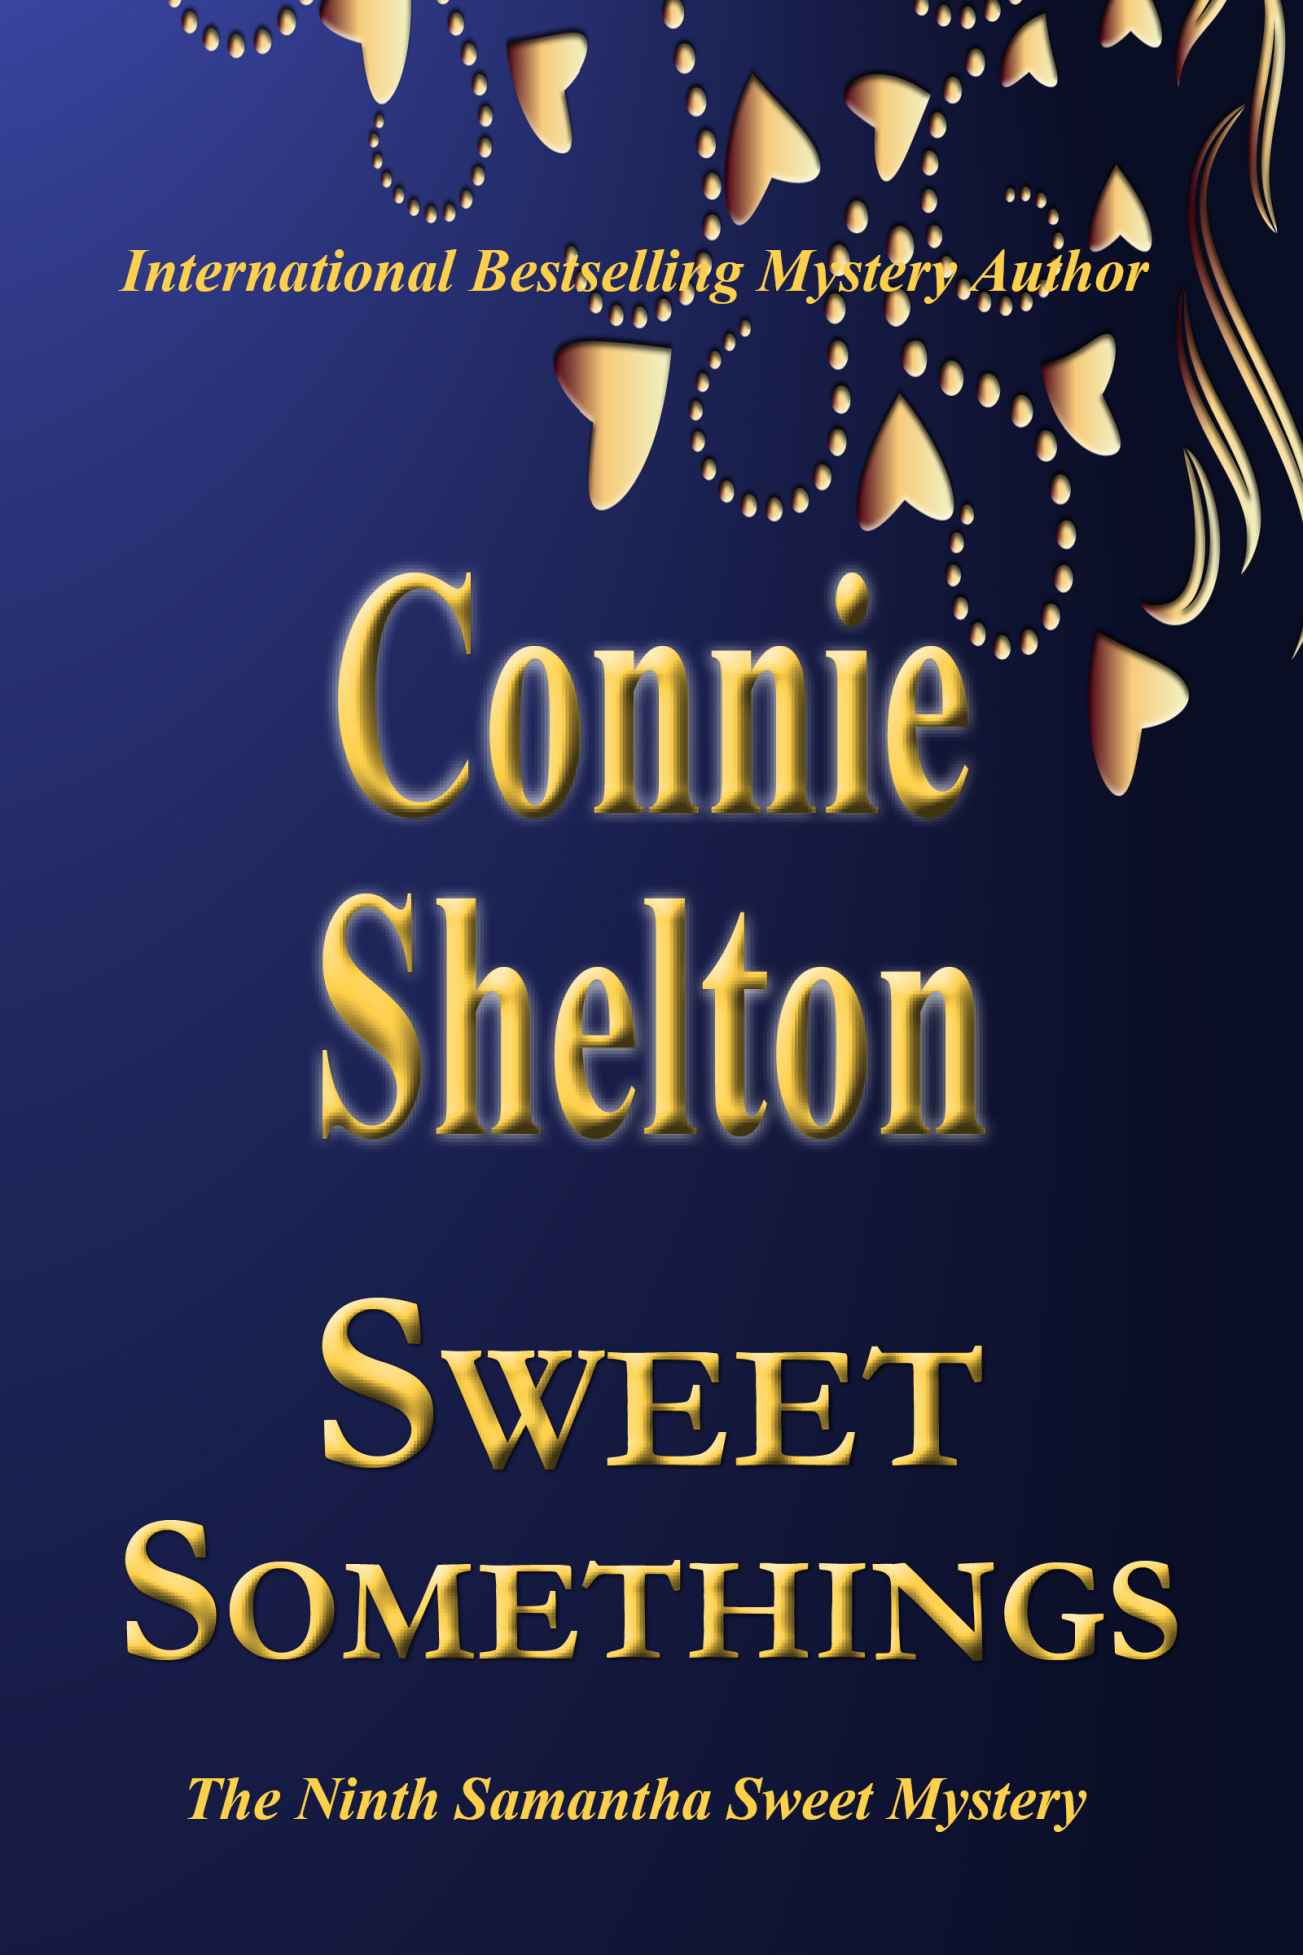 Sweet Somethings (Samantha Sweet Mysteries) by Connie Shelton